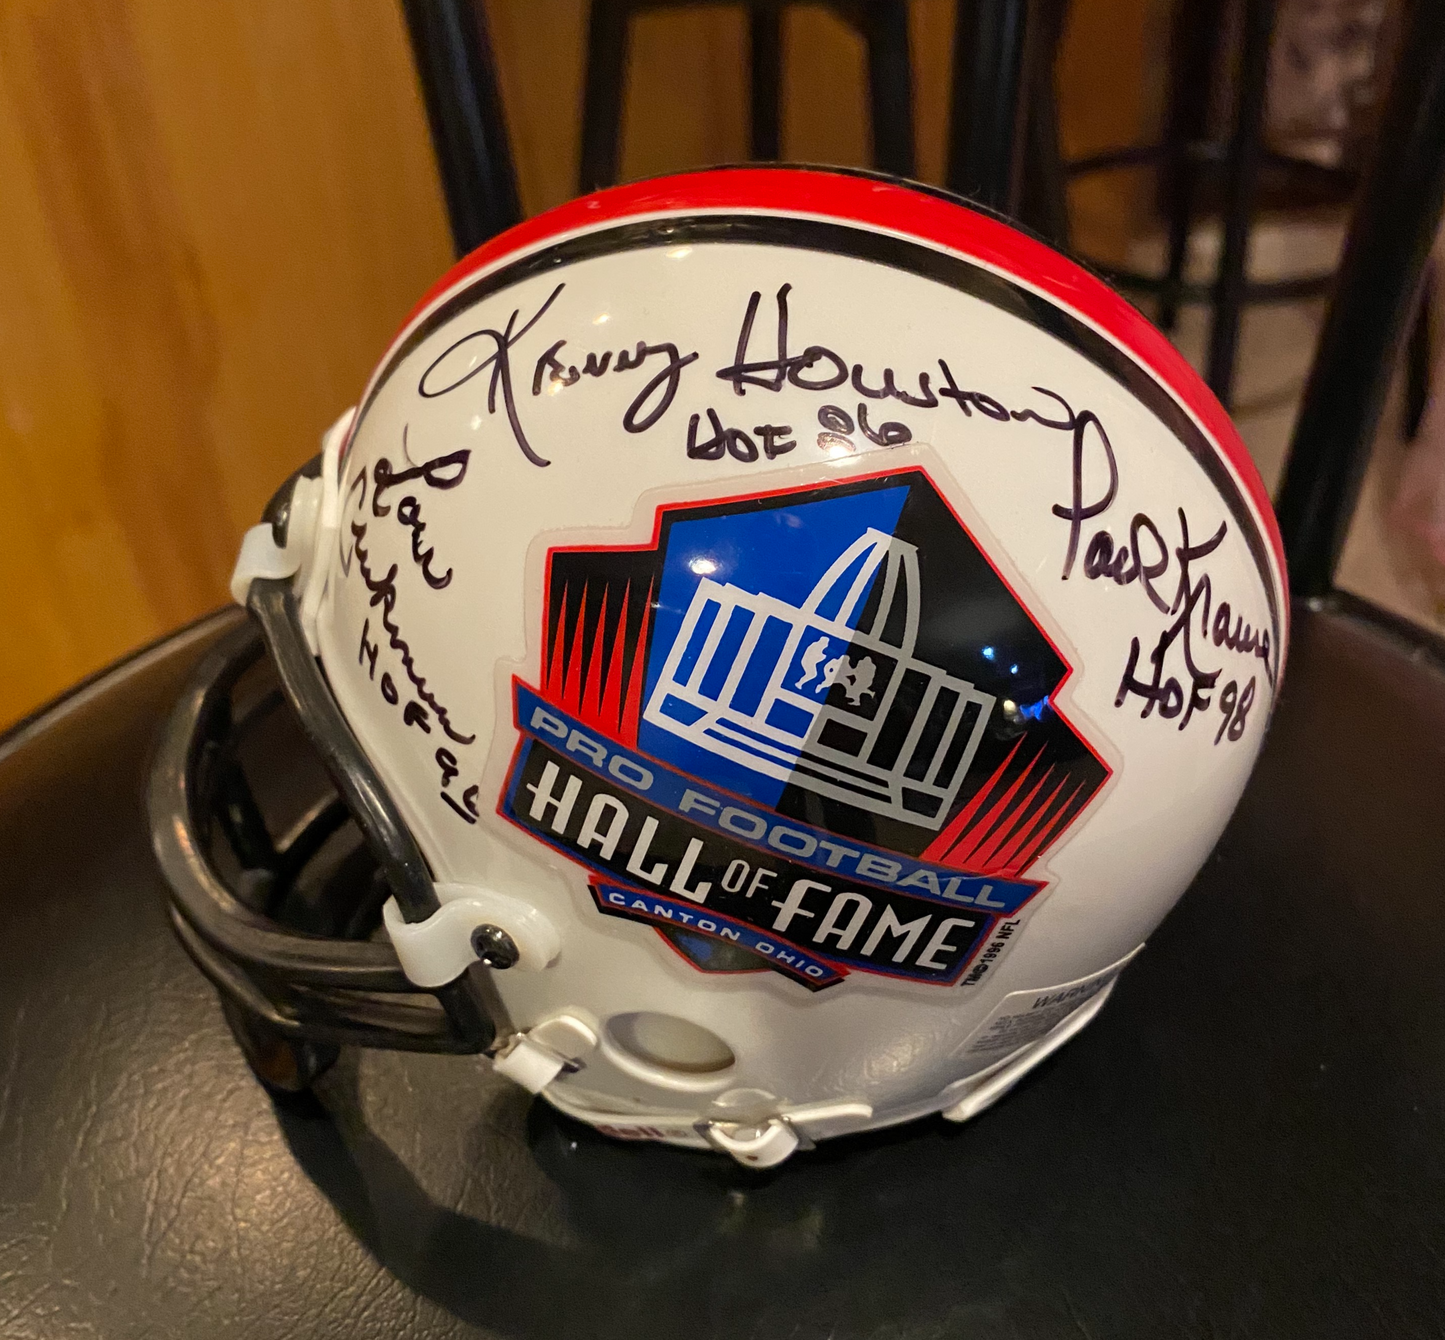 NFL Hall of Fame F/S Helmet Signed by Kenny Houston, Lou Creekmur, Jackie Smith, Paul Krause JSA COA - BMC Collectibles